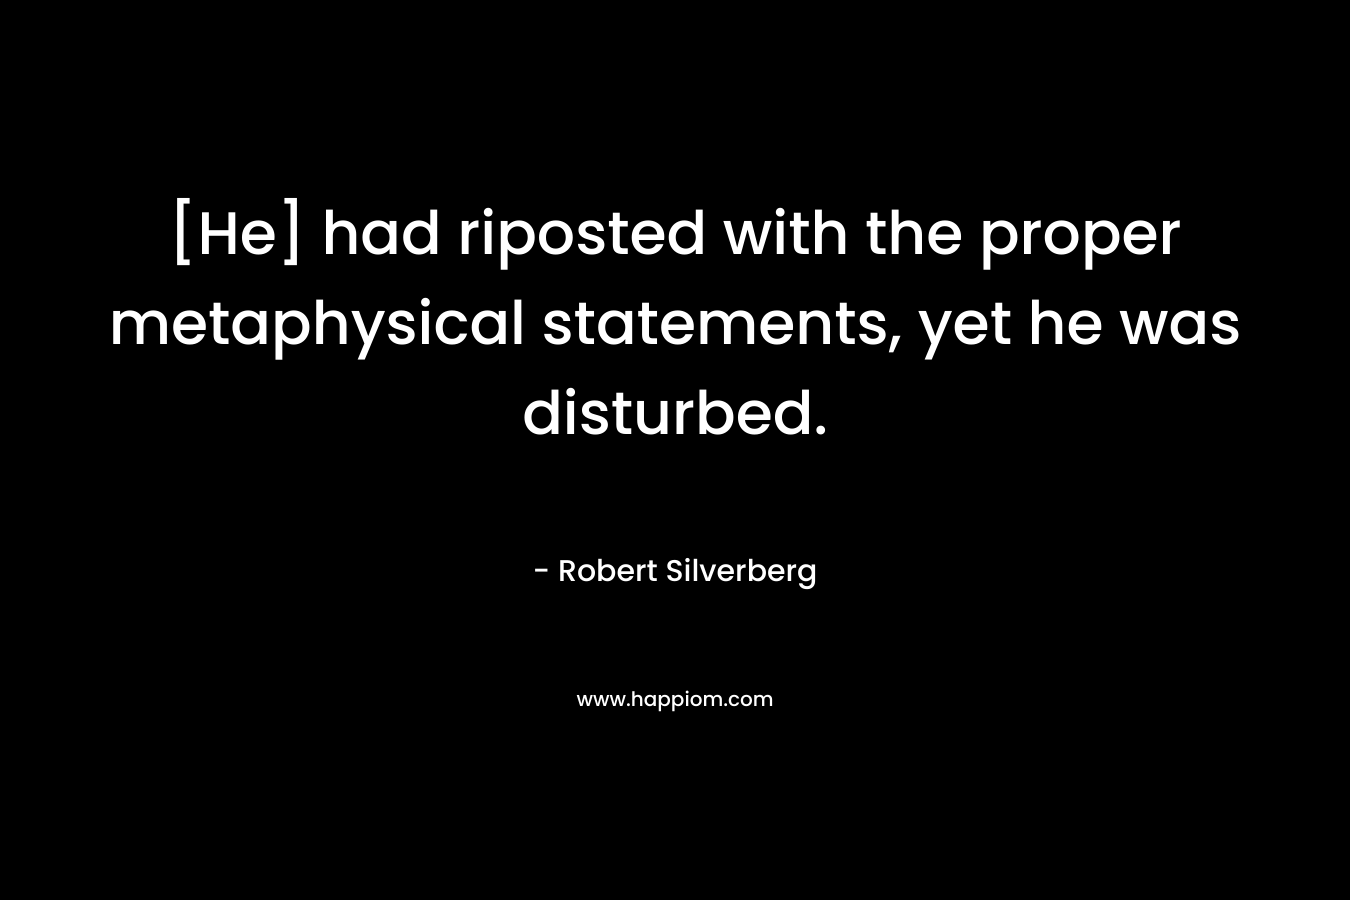 [He] had riposted with the proper metaphysical statements, yet he was disturbed. – Robert Silverberg